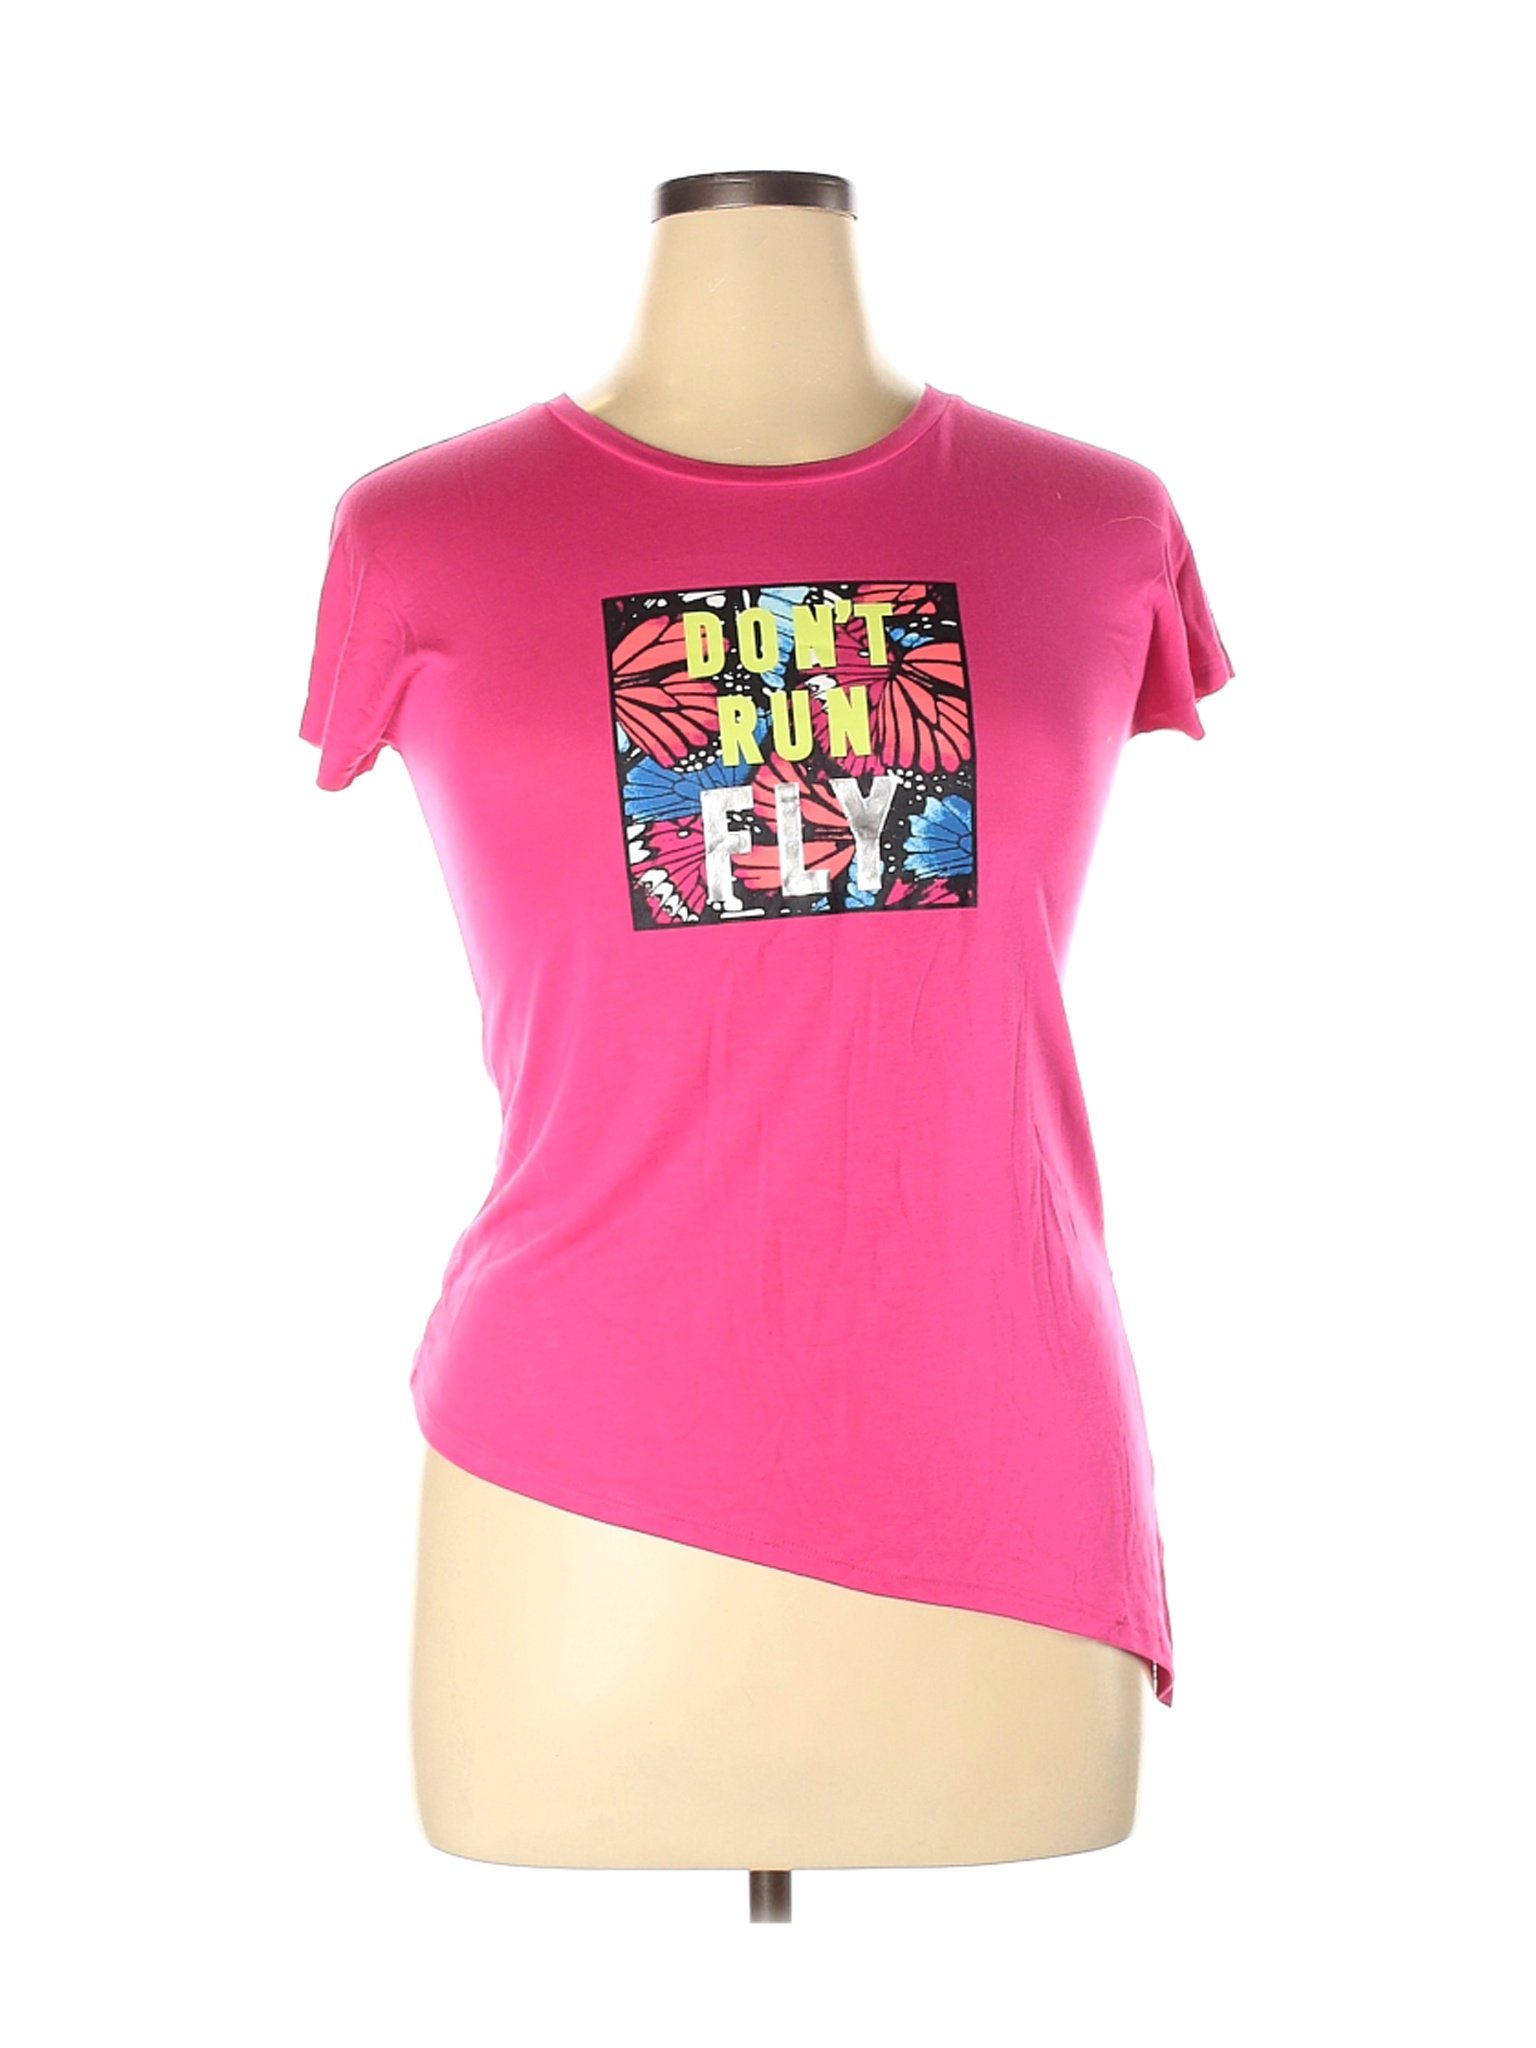 Athletic Works Women Pink Active T-Shirt XL | eBay